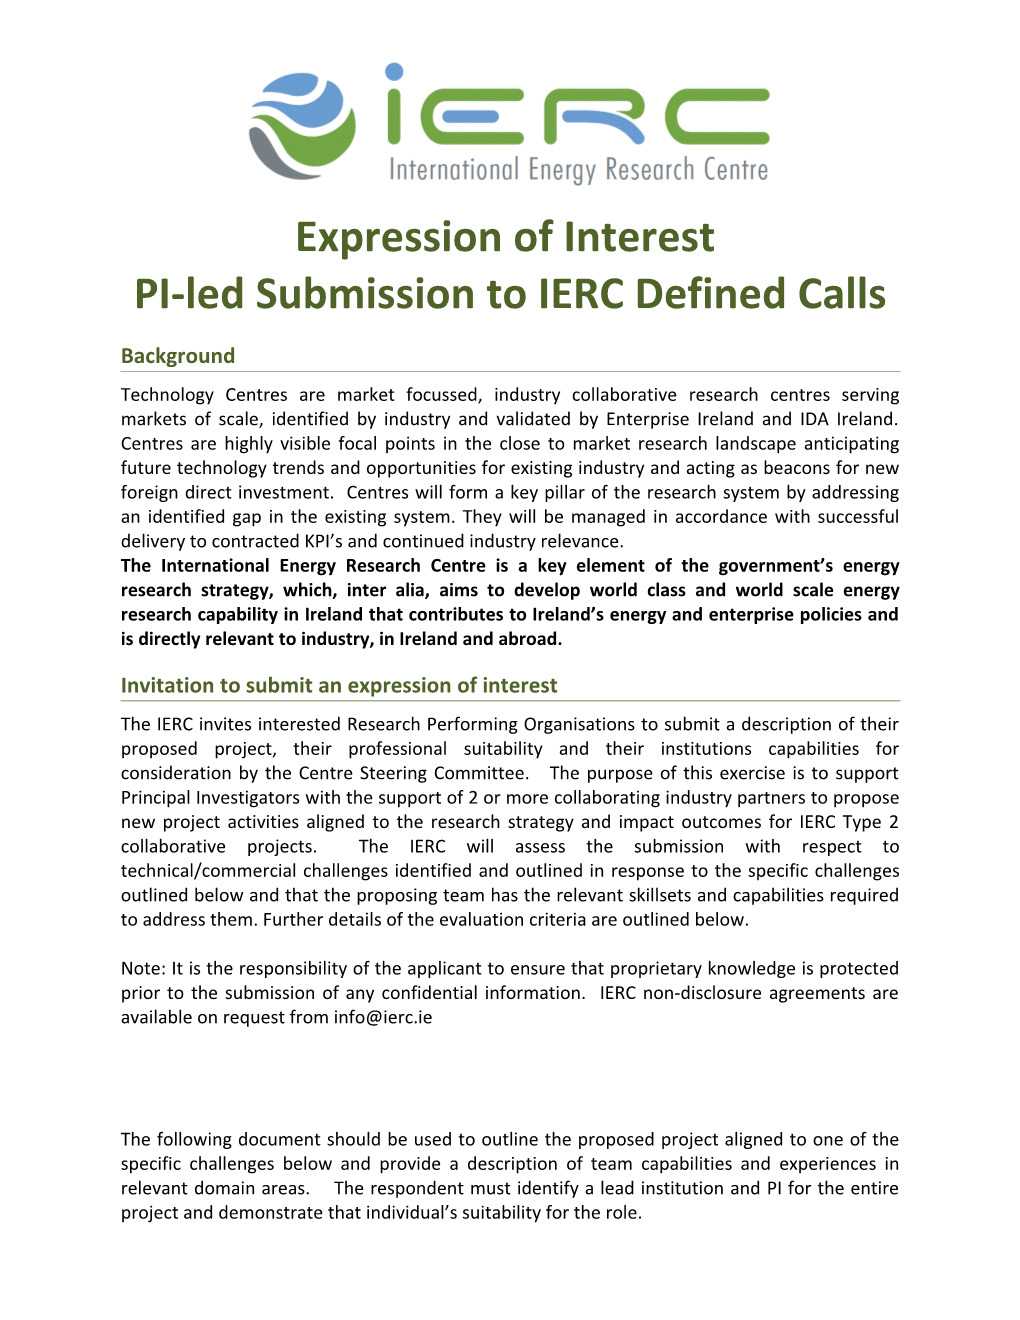 PI-Led Submission to IERC Defined Calls